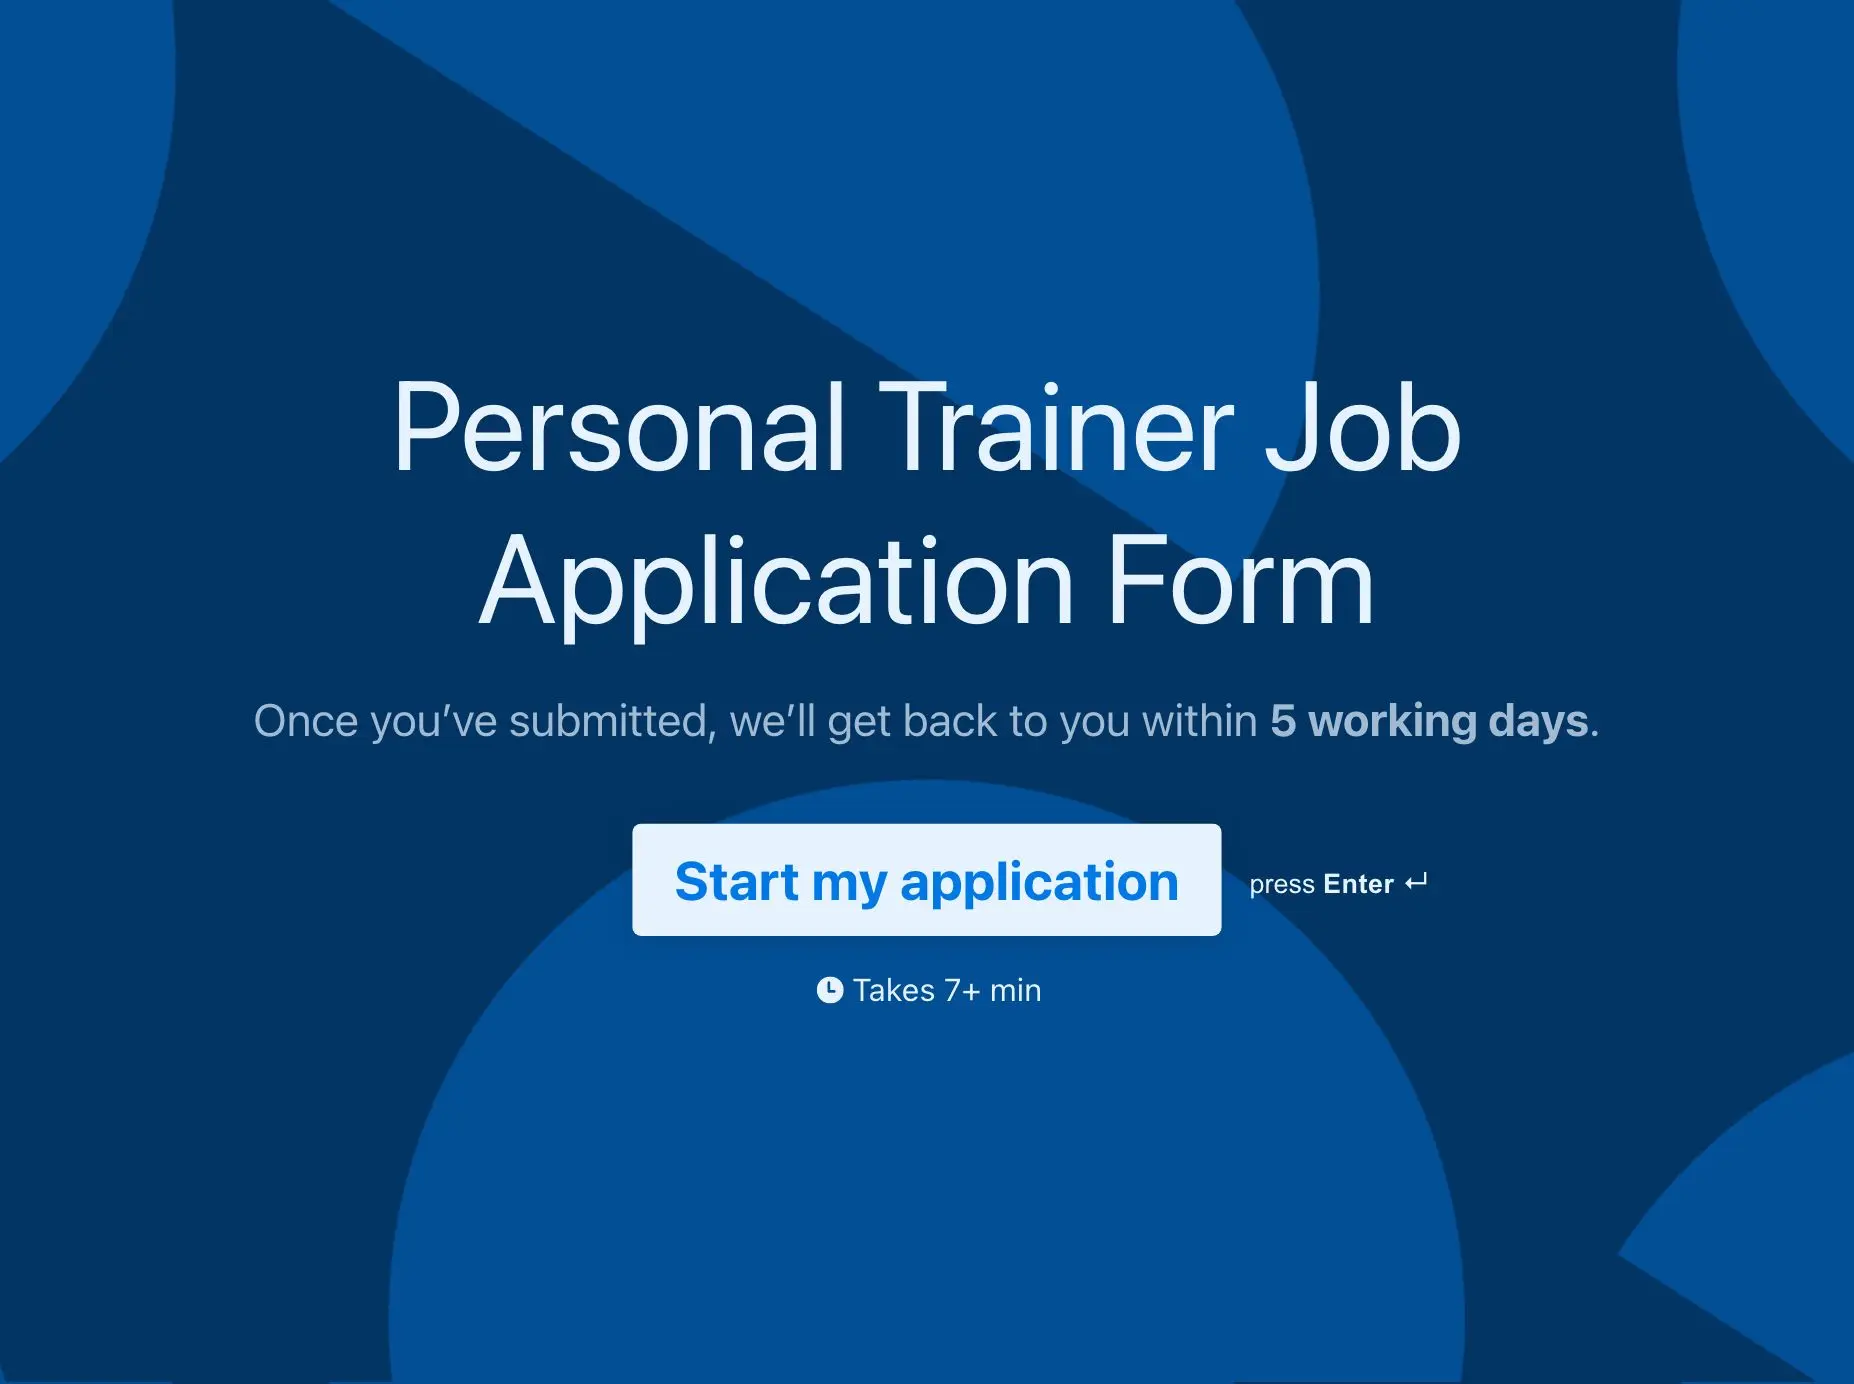 Personal Trainer Job Application Form Template Hero